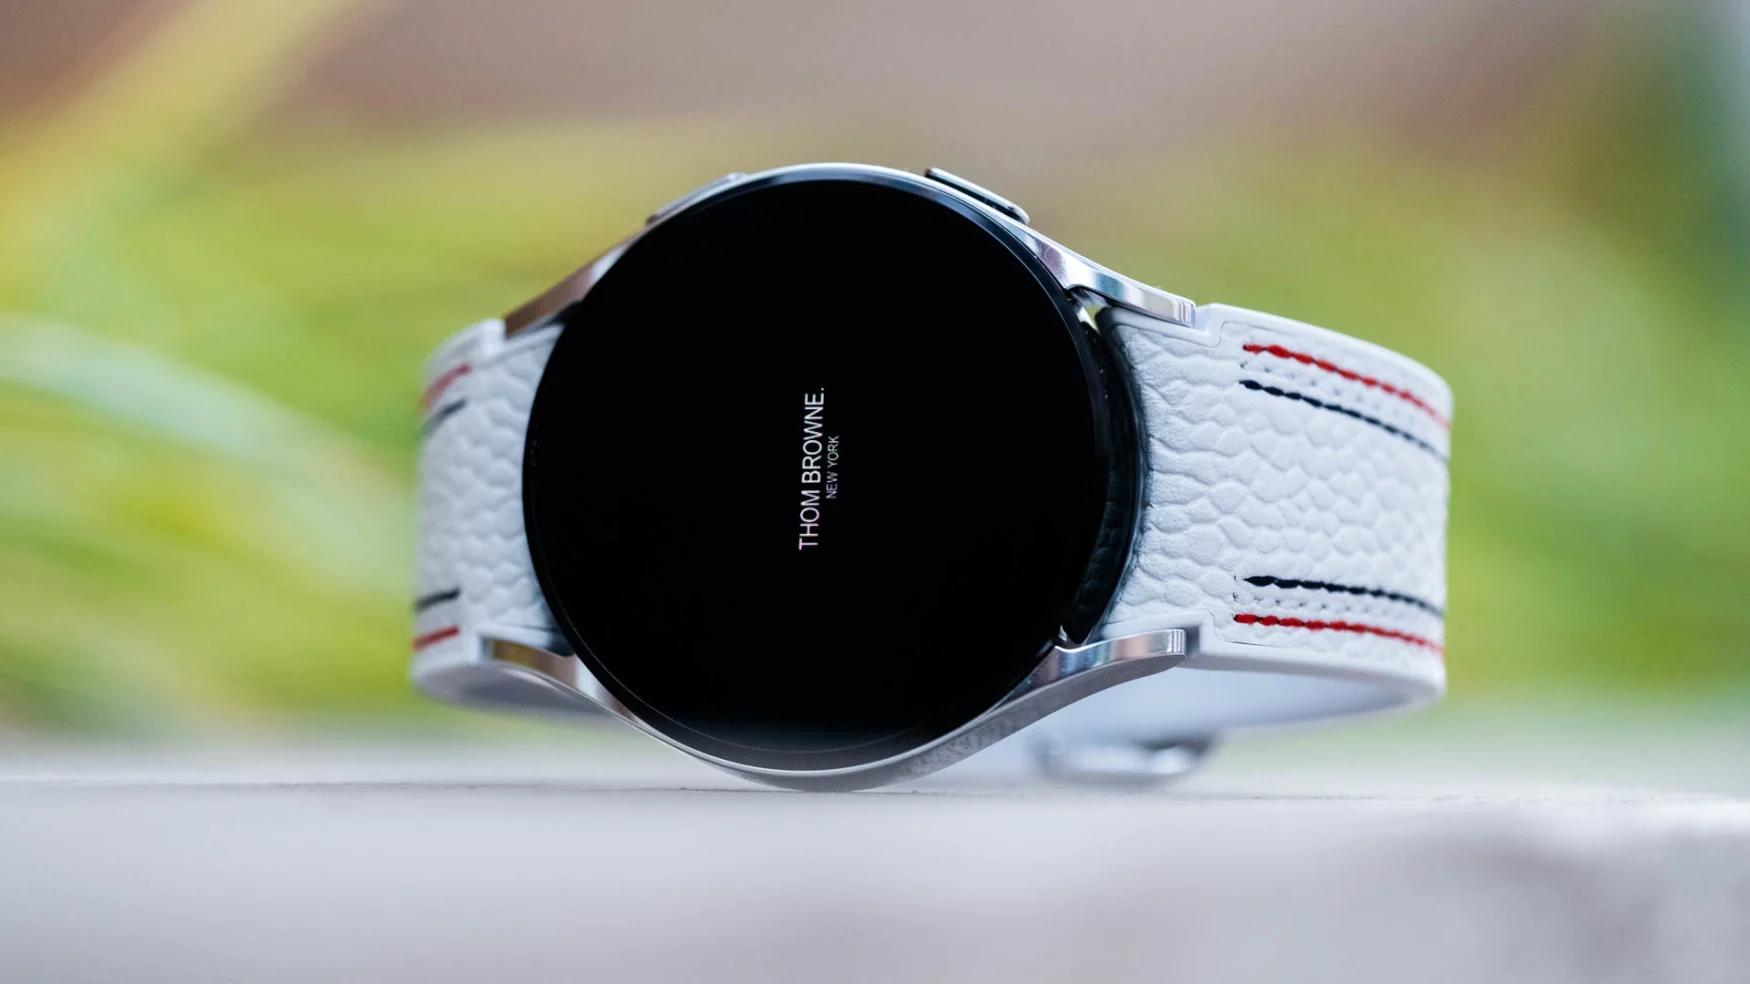 A Thom Browne edition of the Samsung Galaxy Watch 4 laying on its side with greenery in the background.